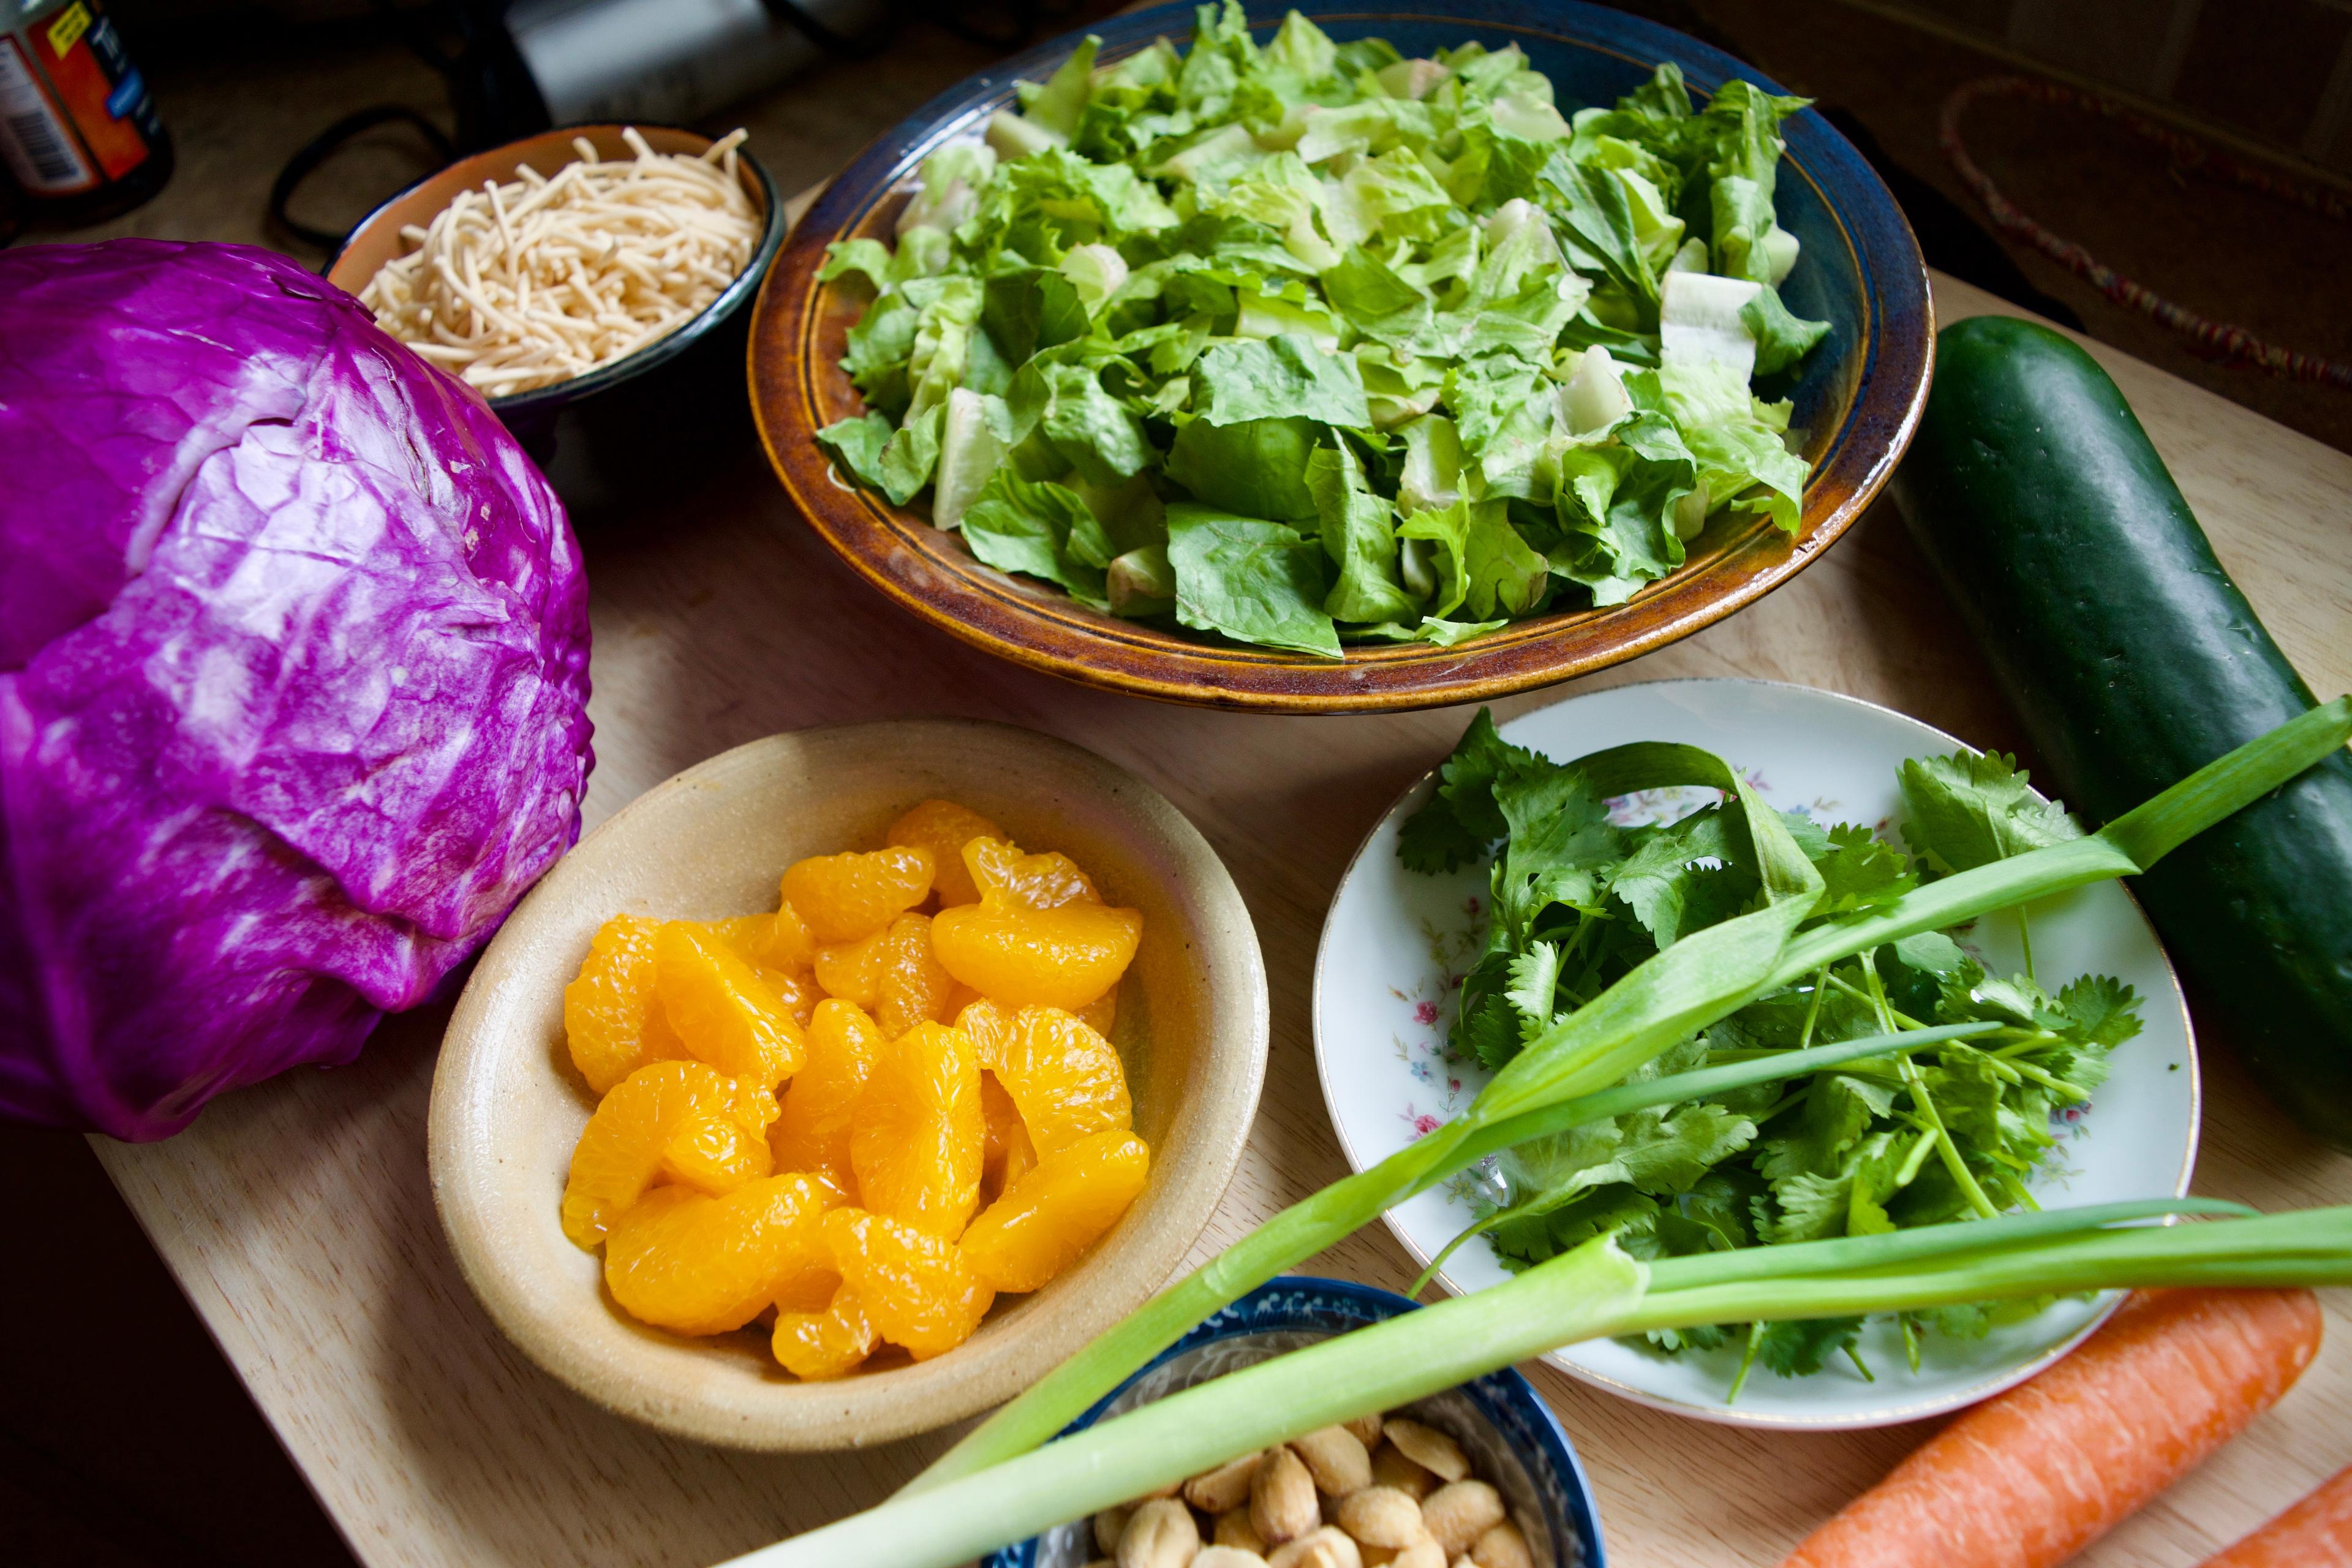 Ingredients - romaine, mandarin oranges, cilantro, peanuts, red cabbage, cucumber, carrots, and chow mein noodles